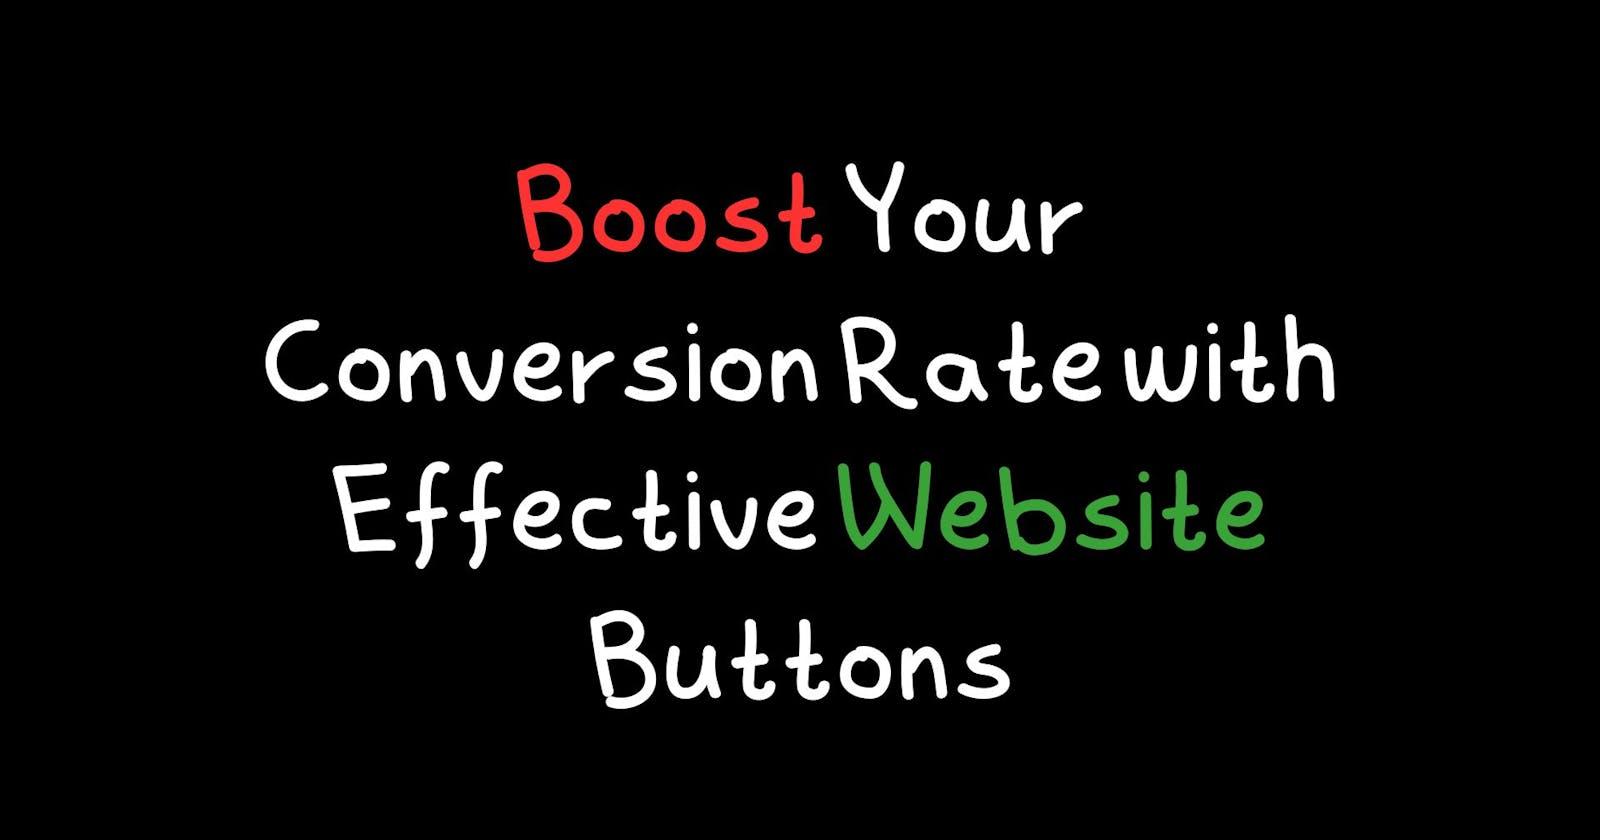 Boost Your Conversion Rate with Effective Website Buttons